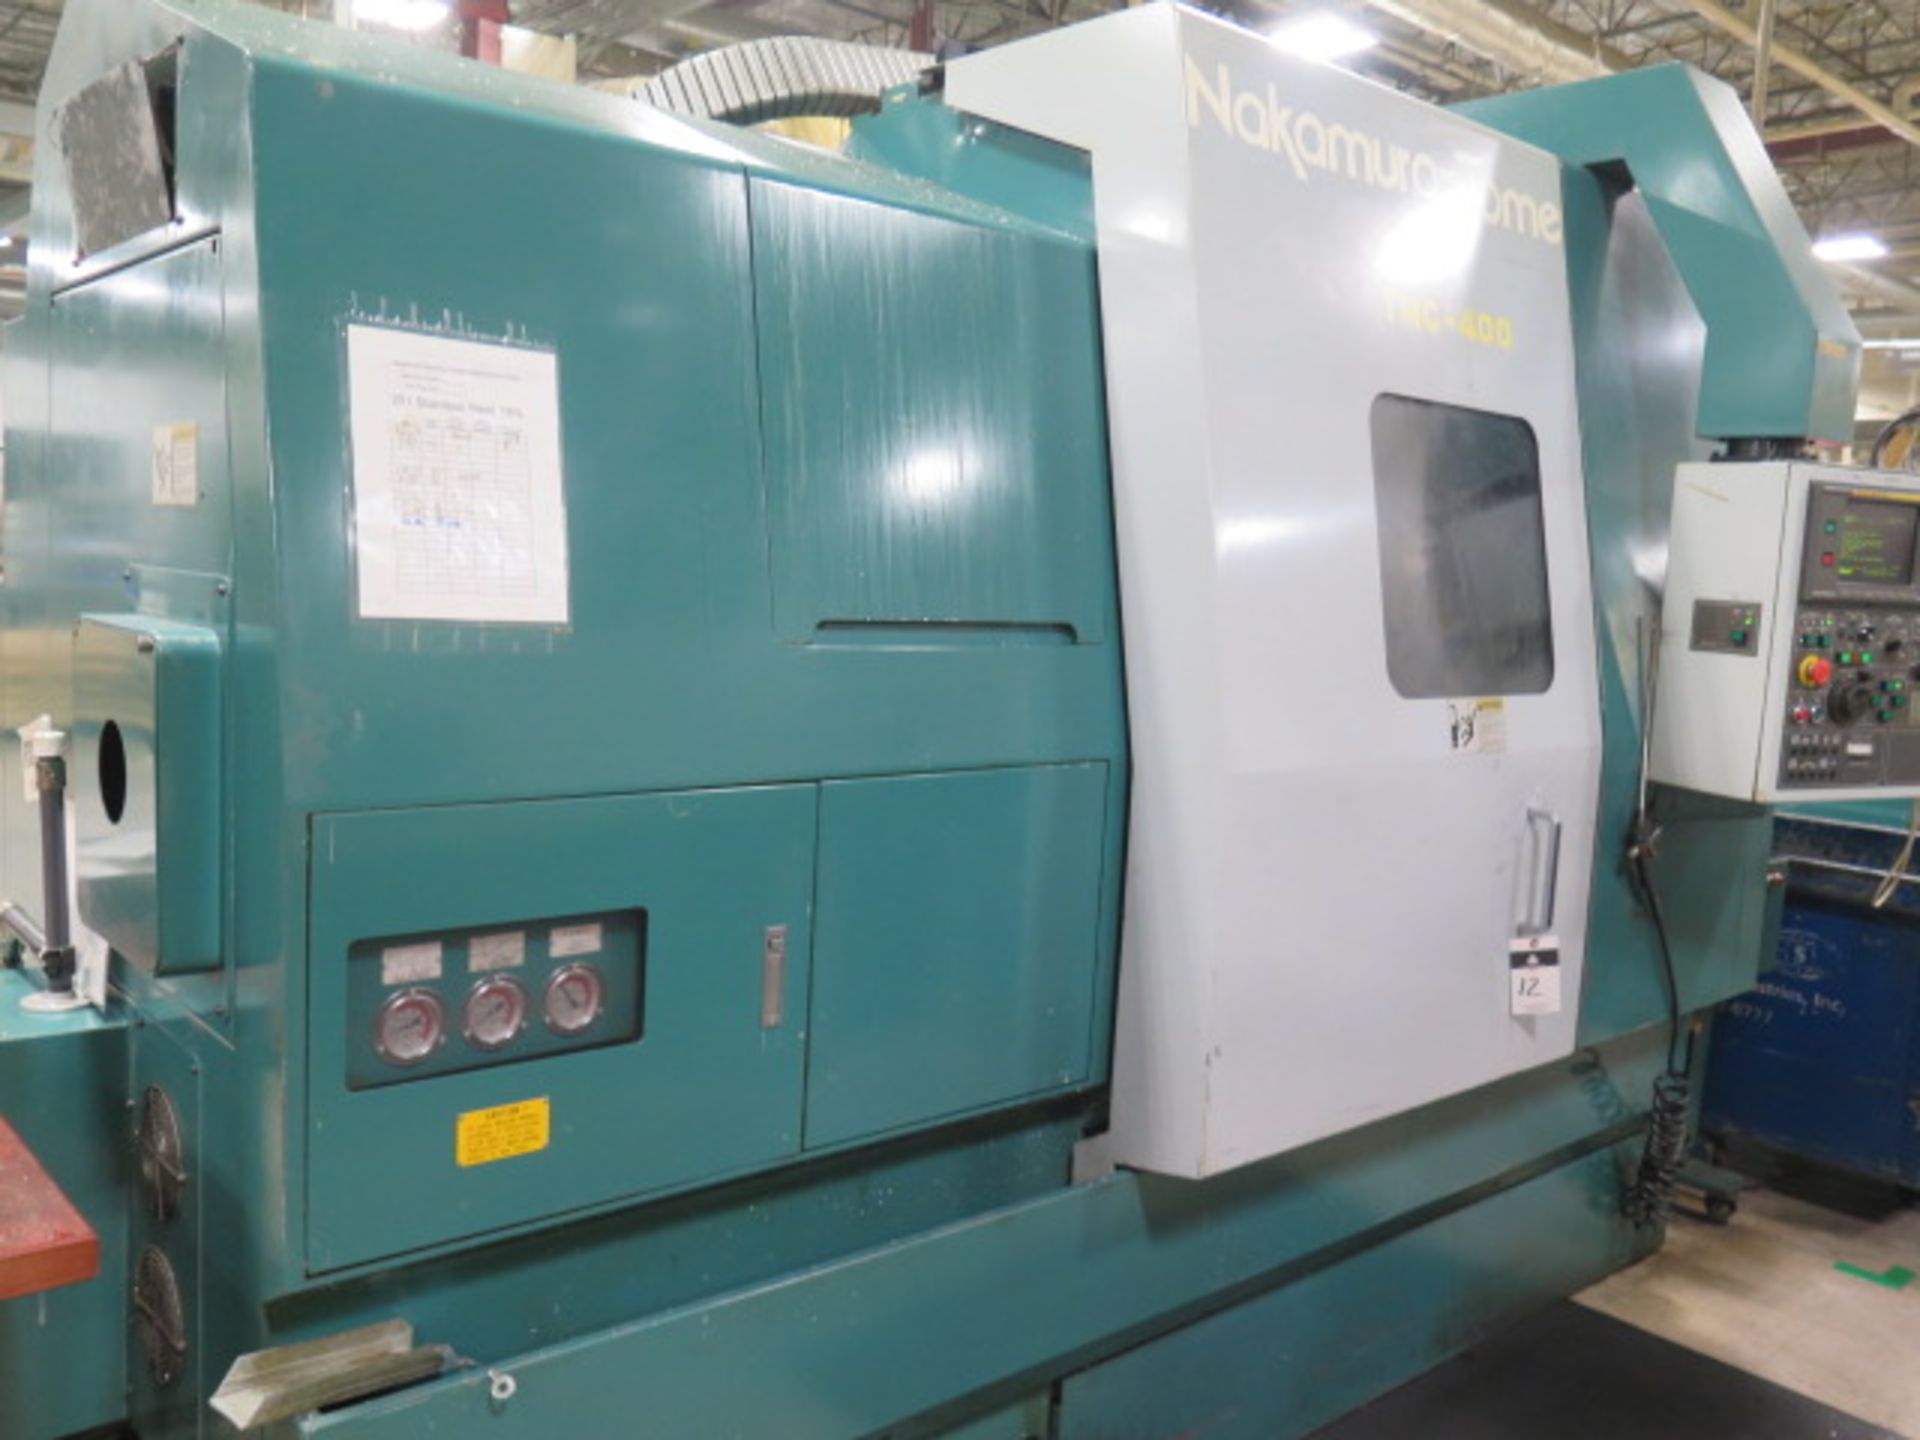 Nakamura-Tome TMC-400 CNC Turning Center s/n C401202 w/ Fanuc Series 16-T Controls, 12-Station Turre - Image 2 of 15